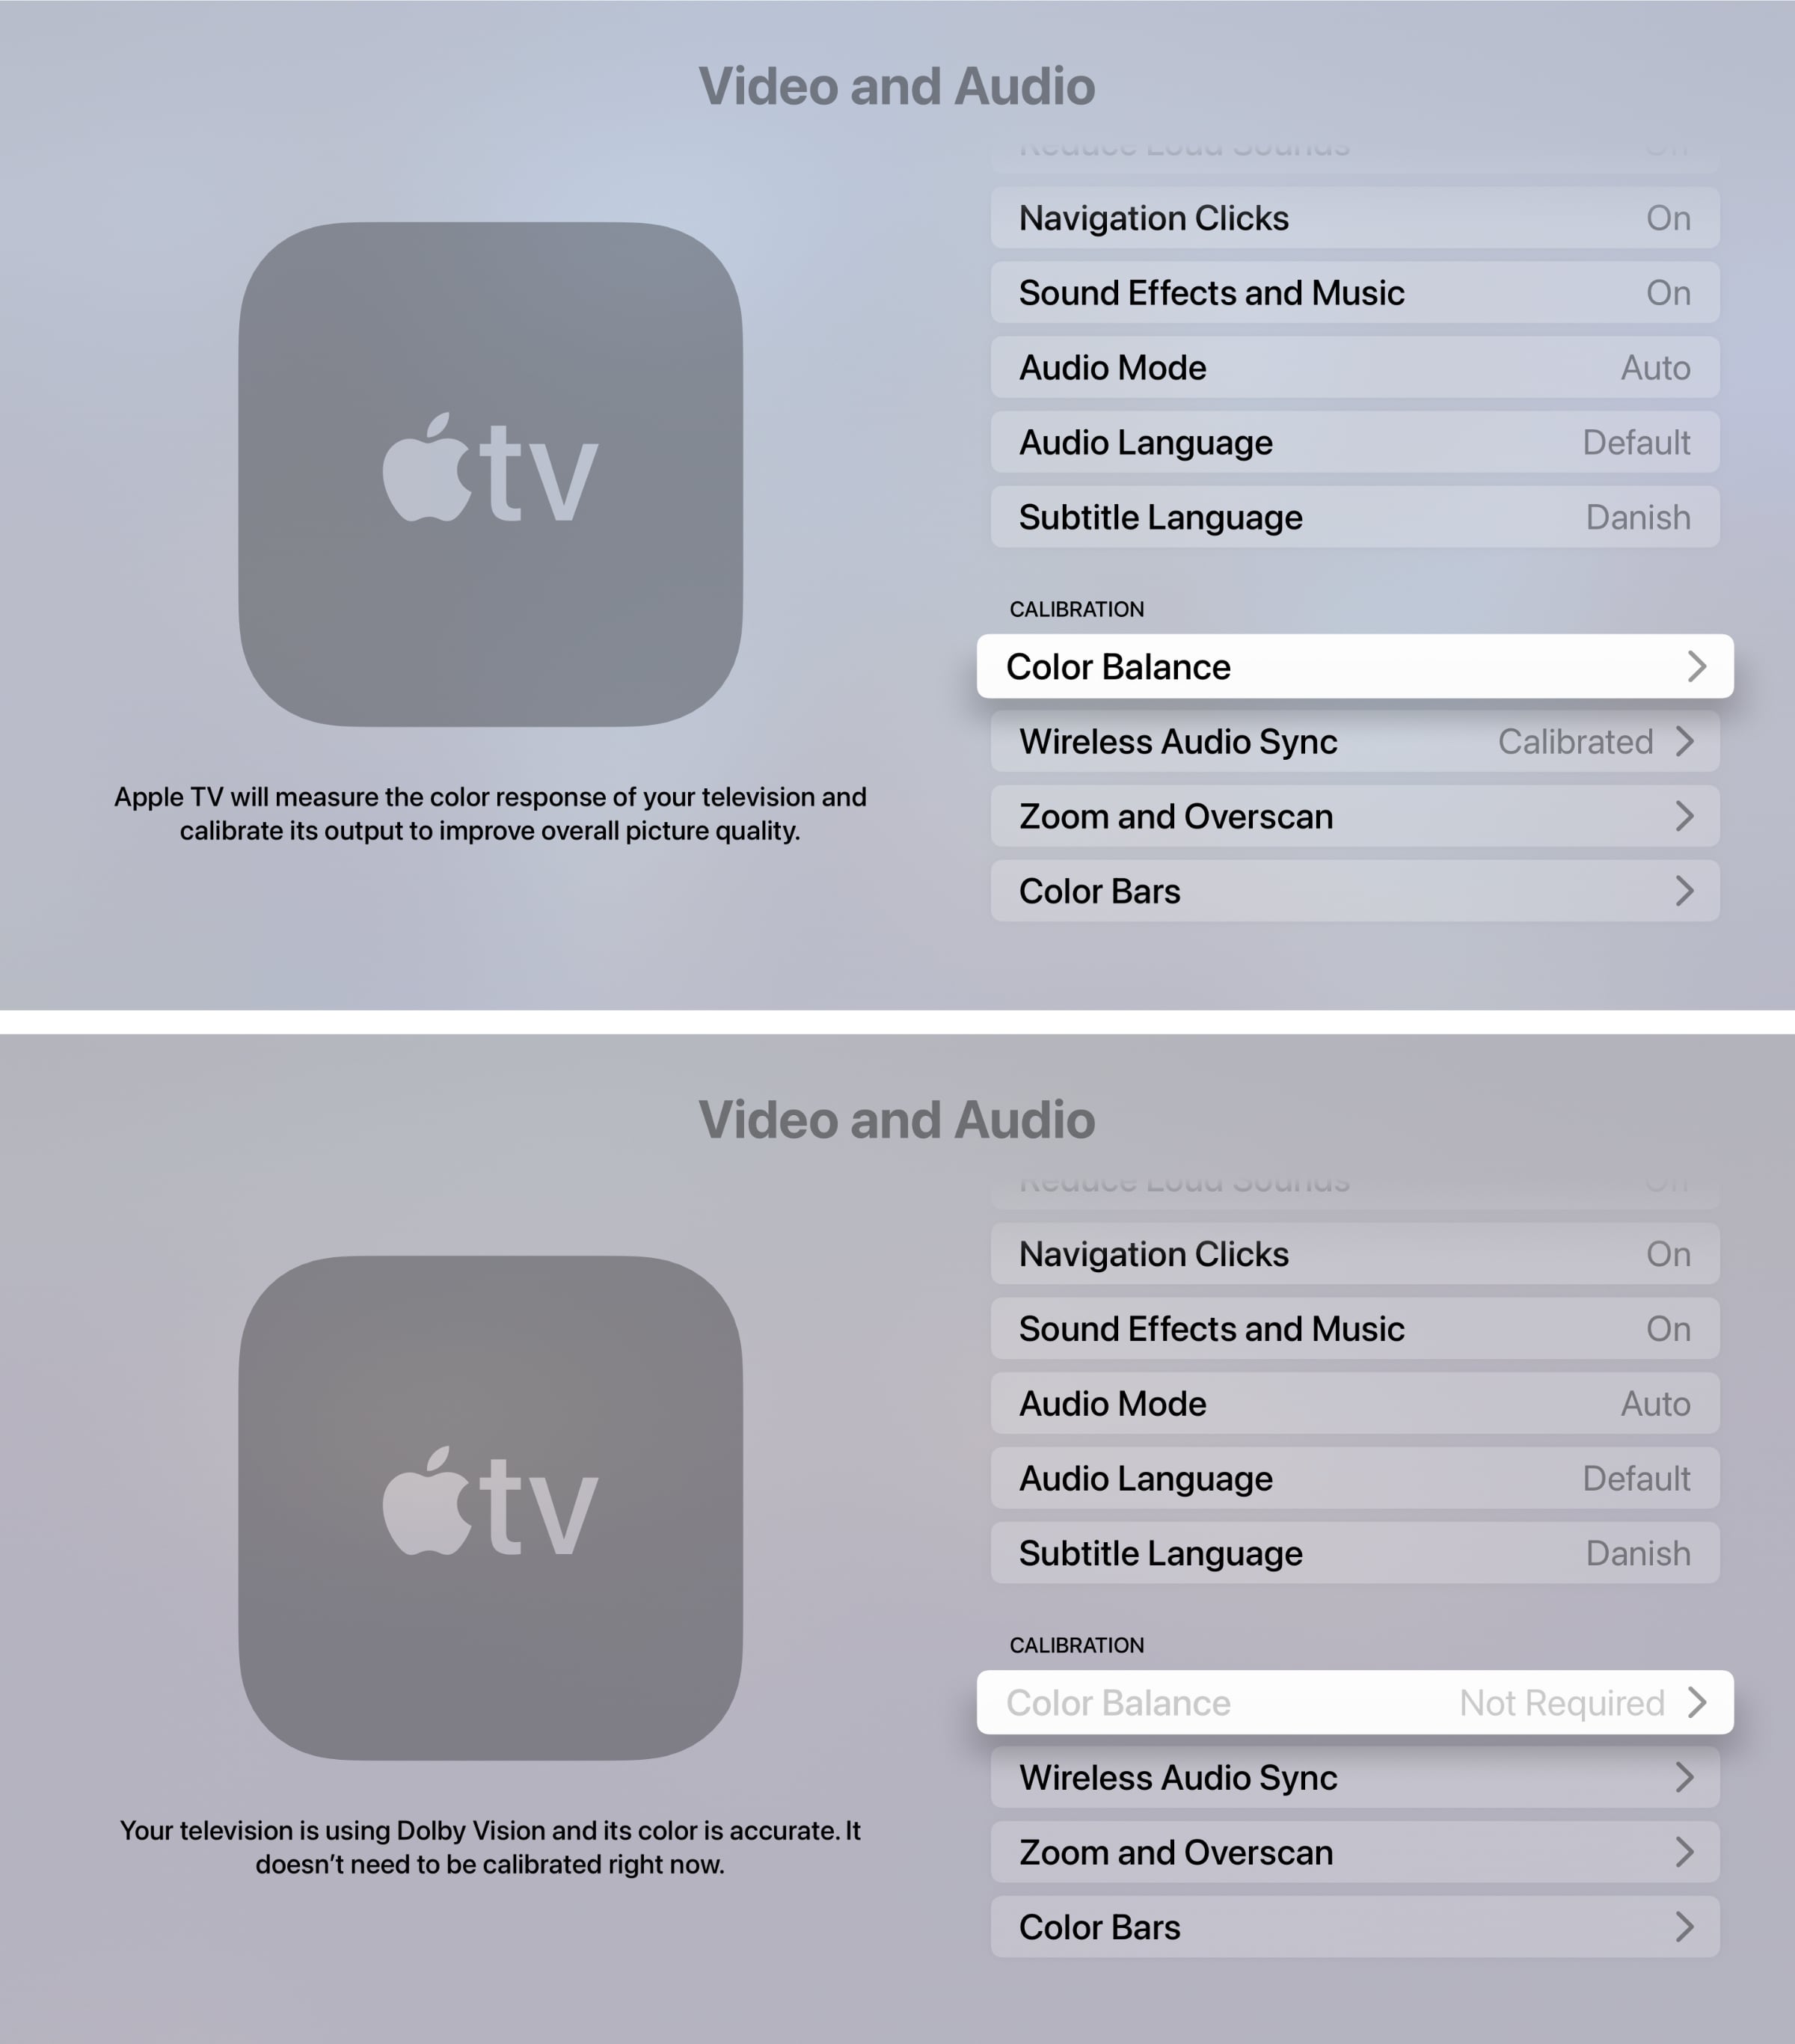 Apple's 'Color Balance' calibration is also coming to Apple TVs - FlatpanelsHD